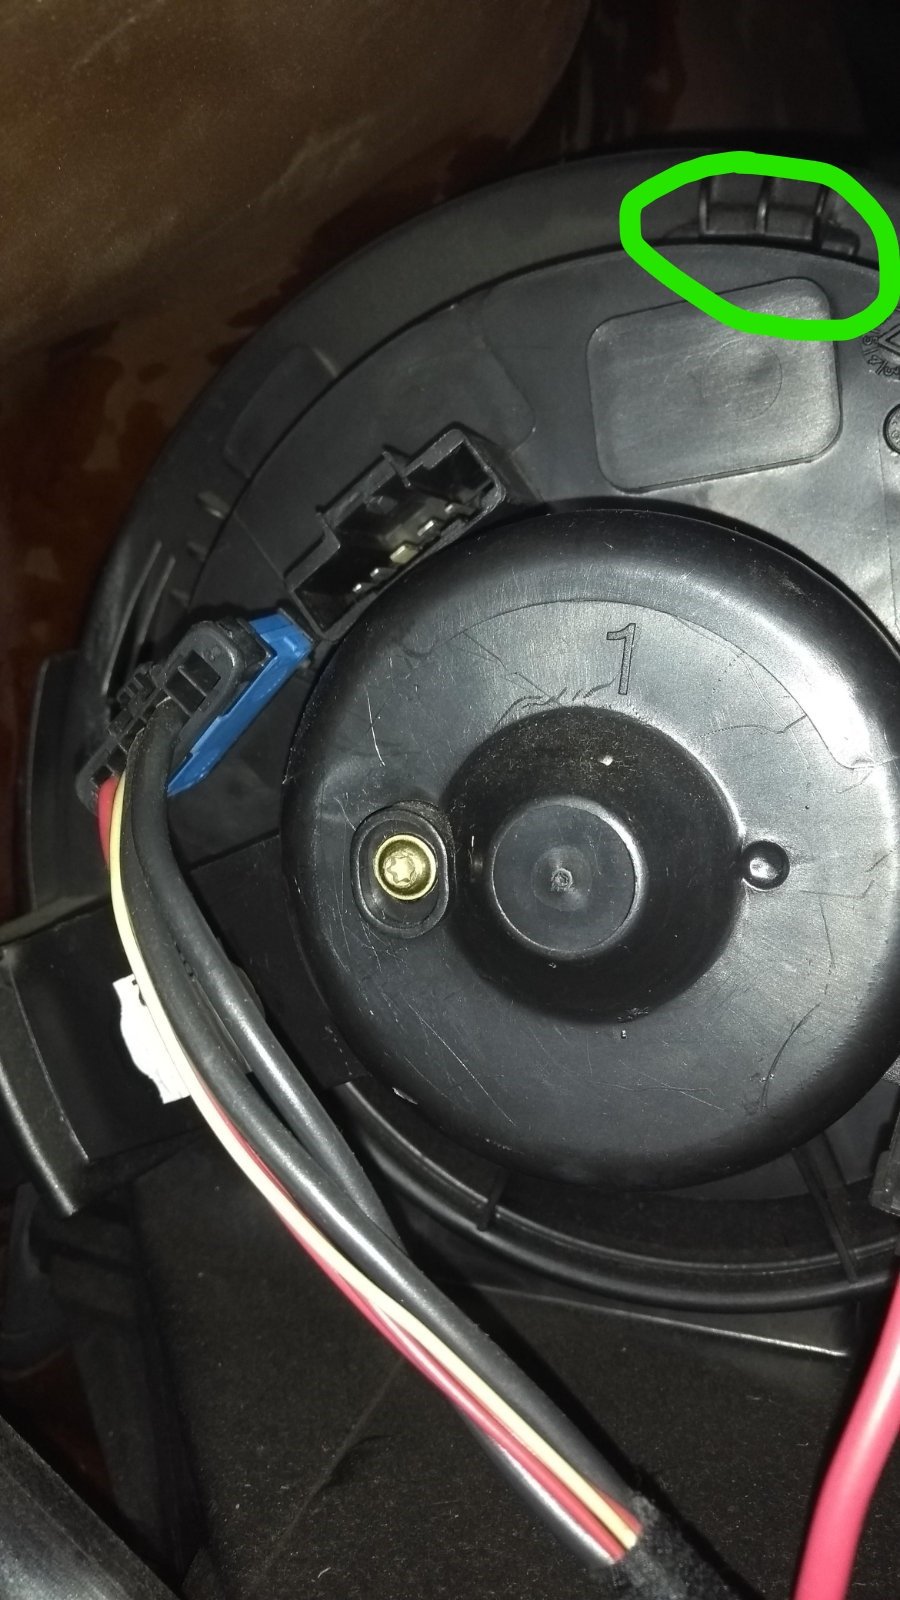 Citroen DS3 heater blower motor / resistor location and removal, 2010 2016  